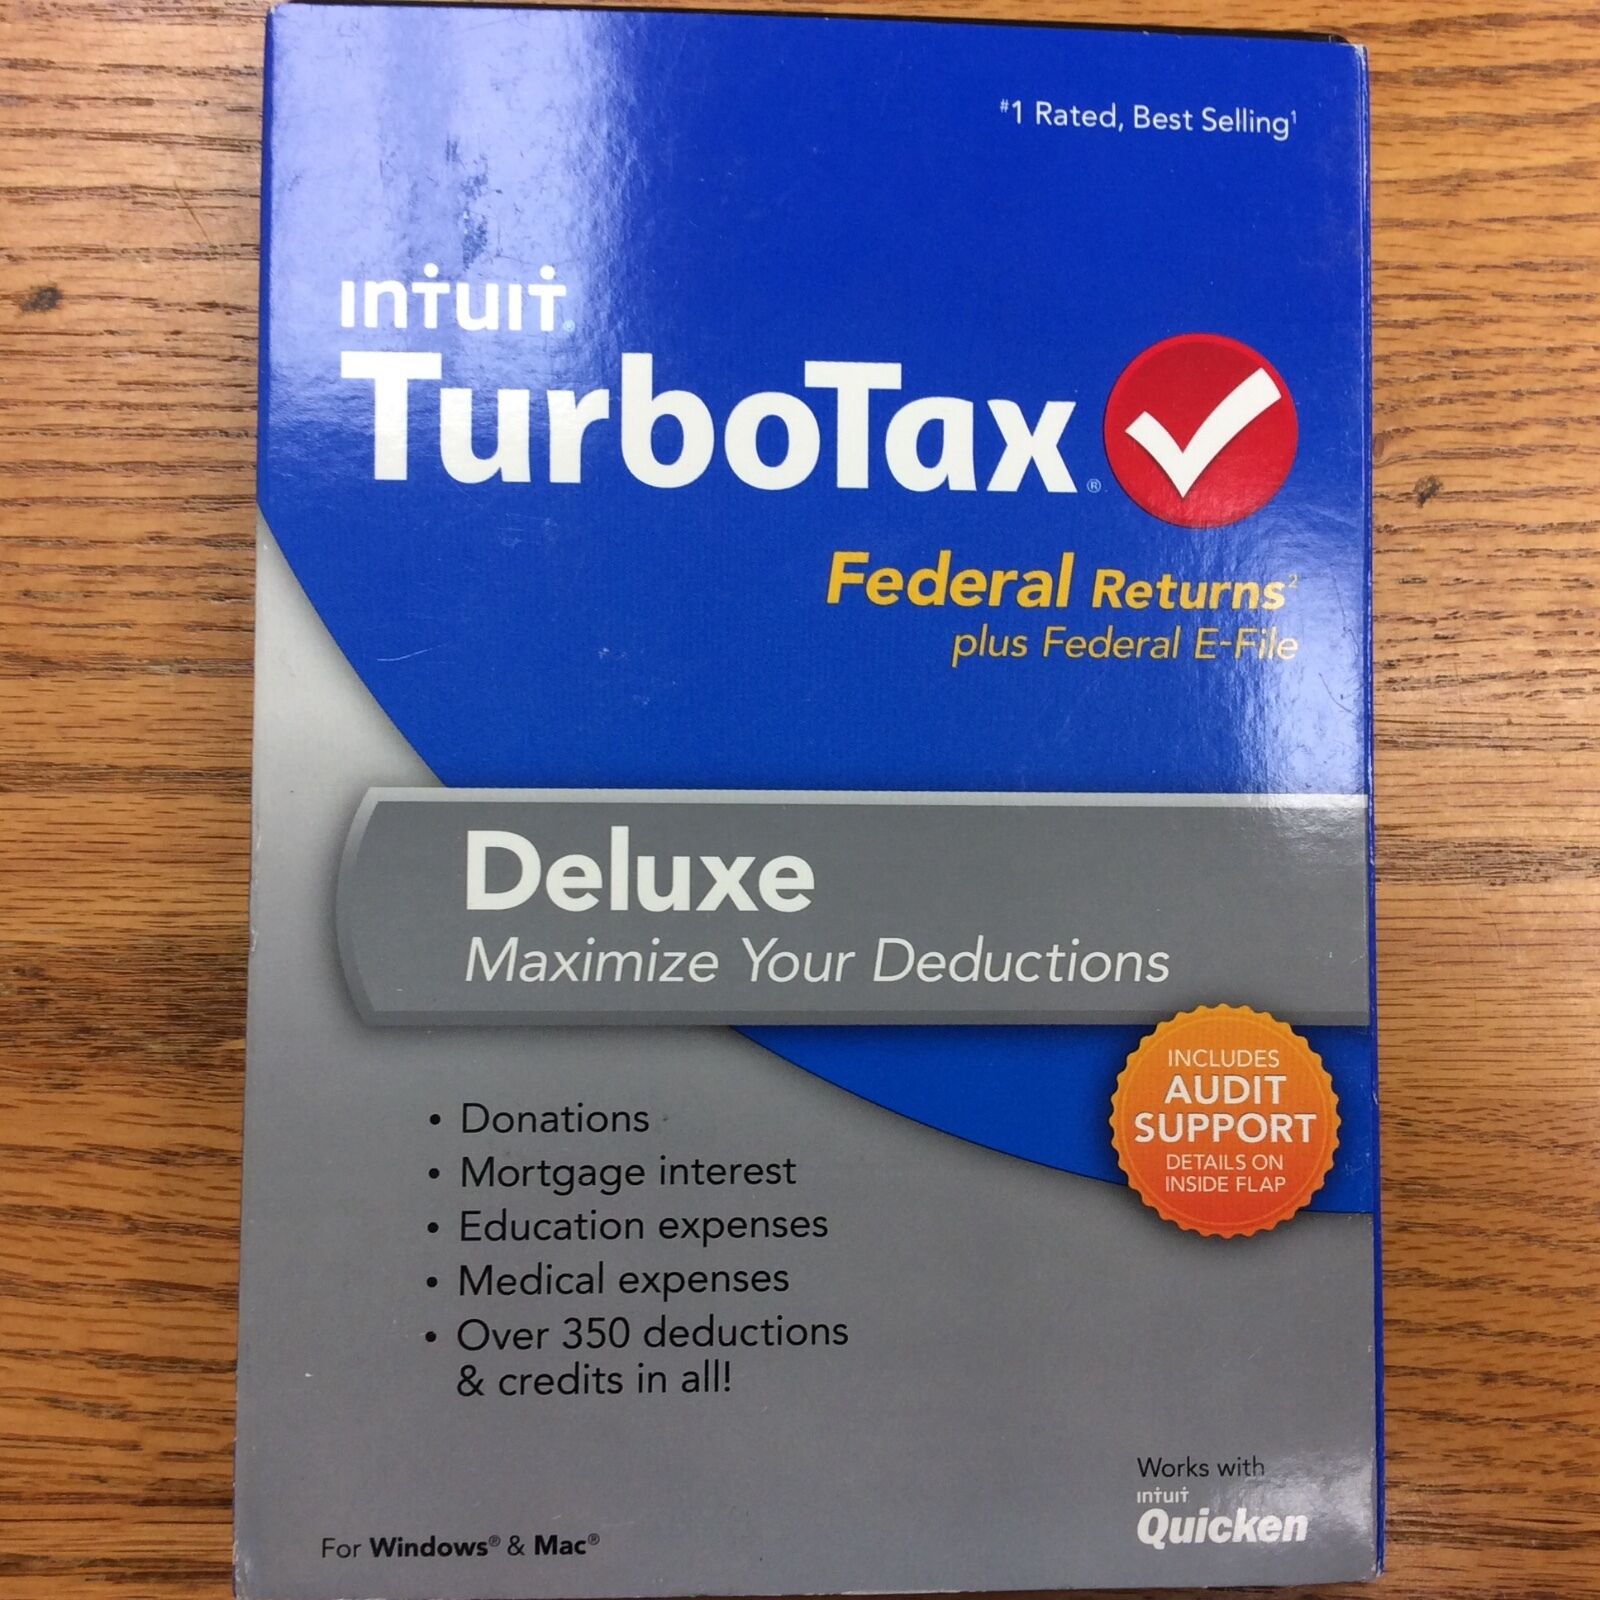 2013 TurboTax Deluxe Federal ONLY Turbo Tax New sealed CD in original DVDcase